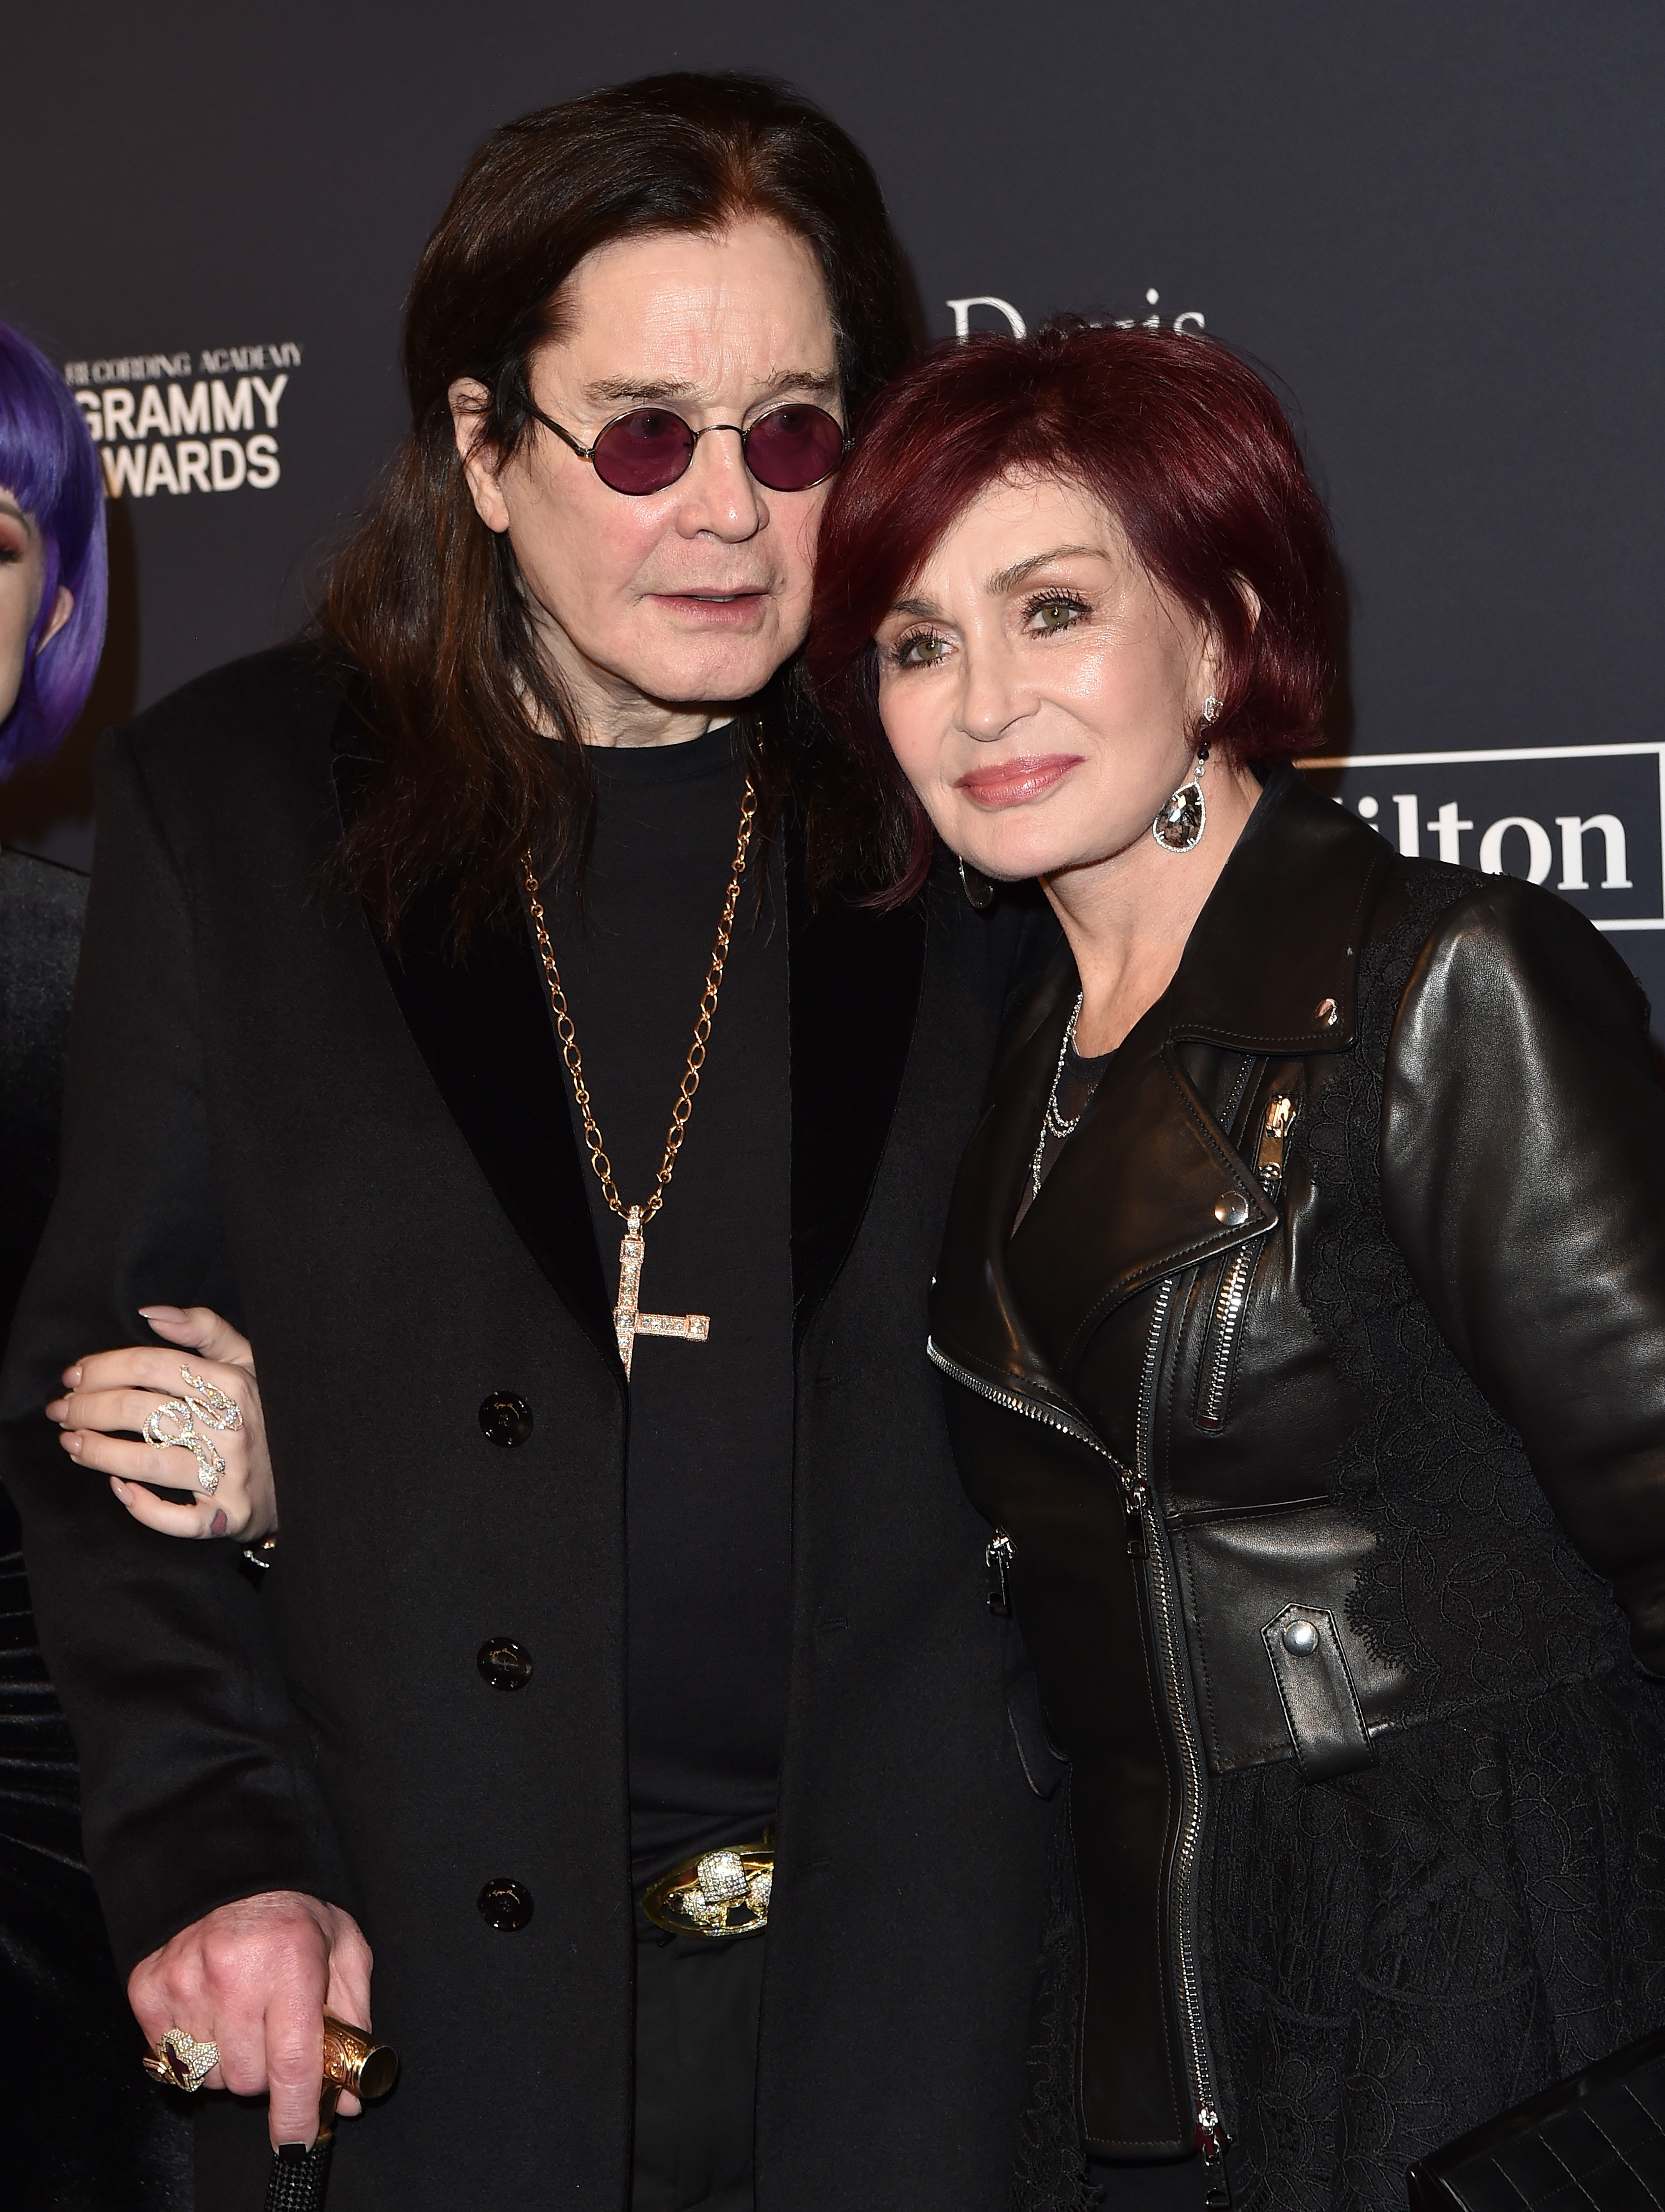 Ozzy Osbourne in a long coat and Sharon Osbourne in a leather jacket, posing at a Grammy event